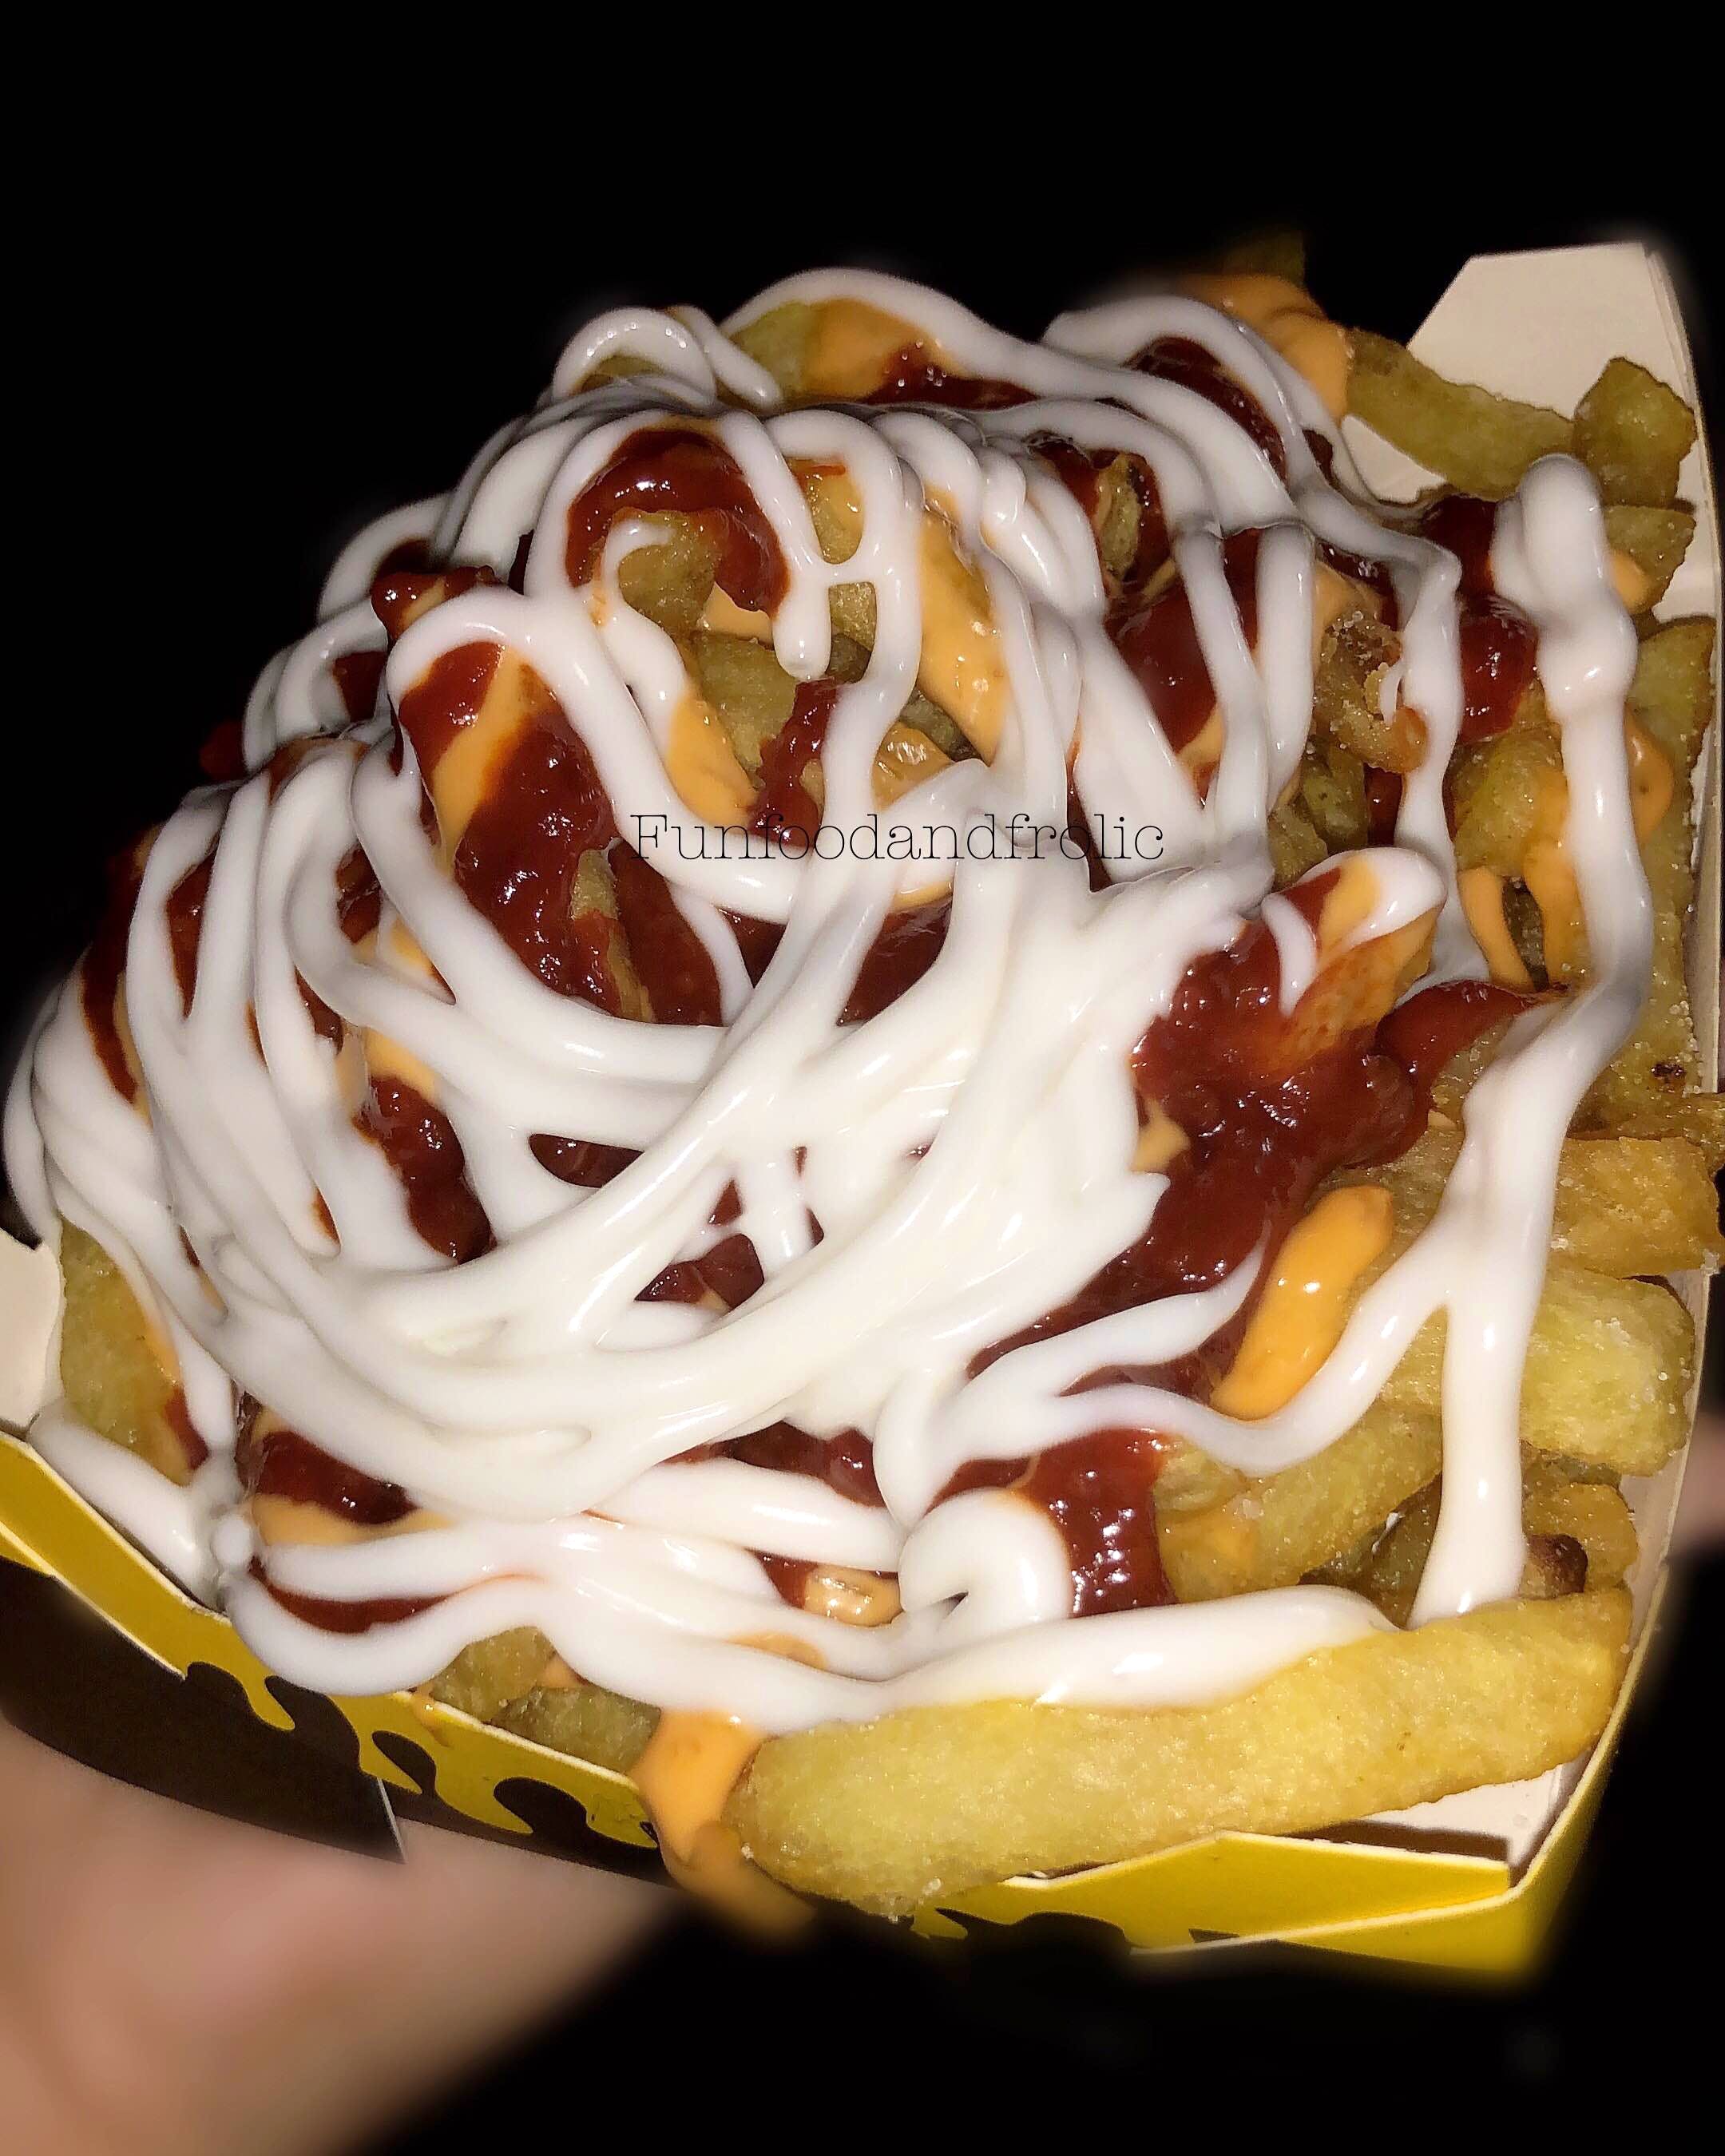 There is no “we” in Fries 😋